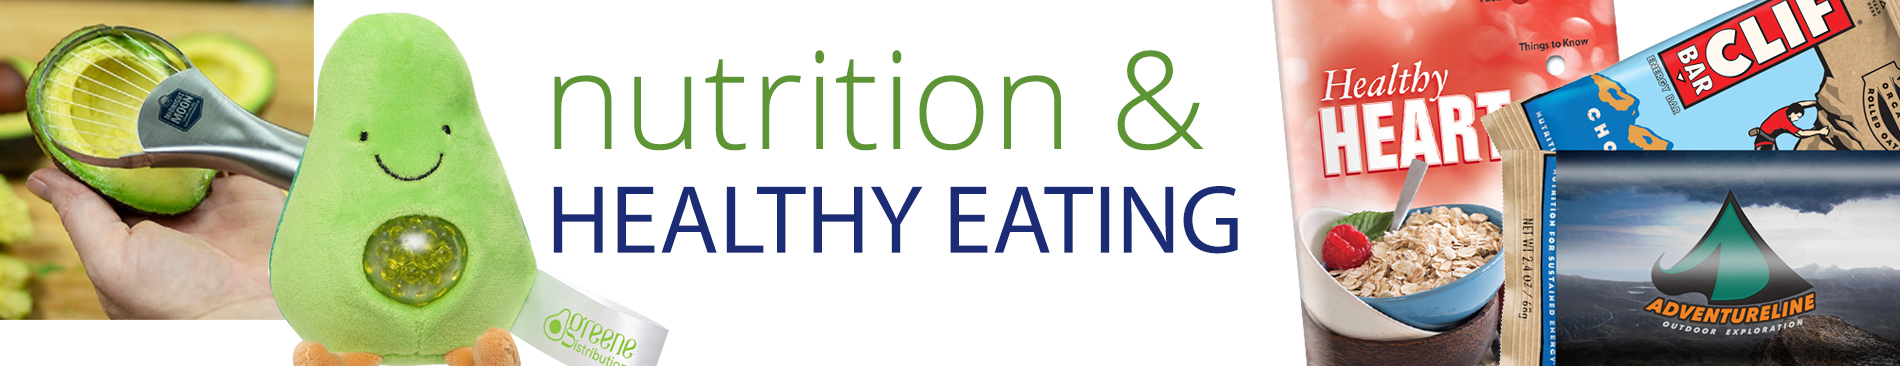 healthy eating and nutrition